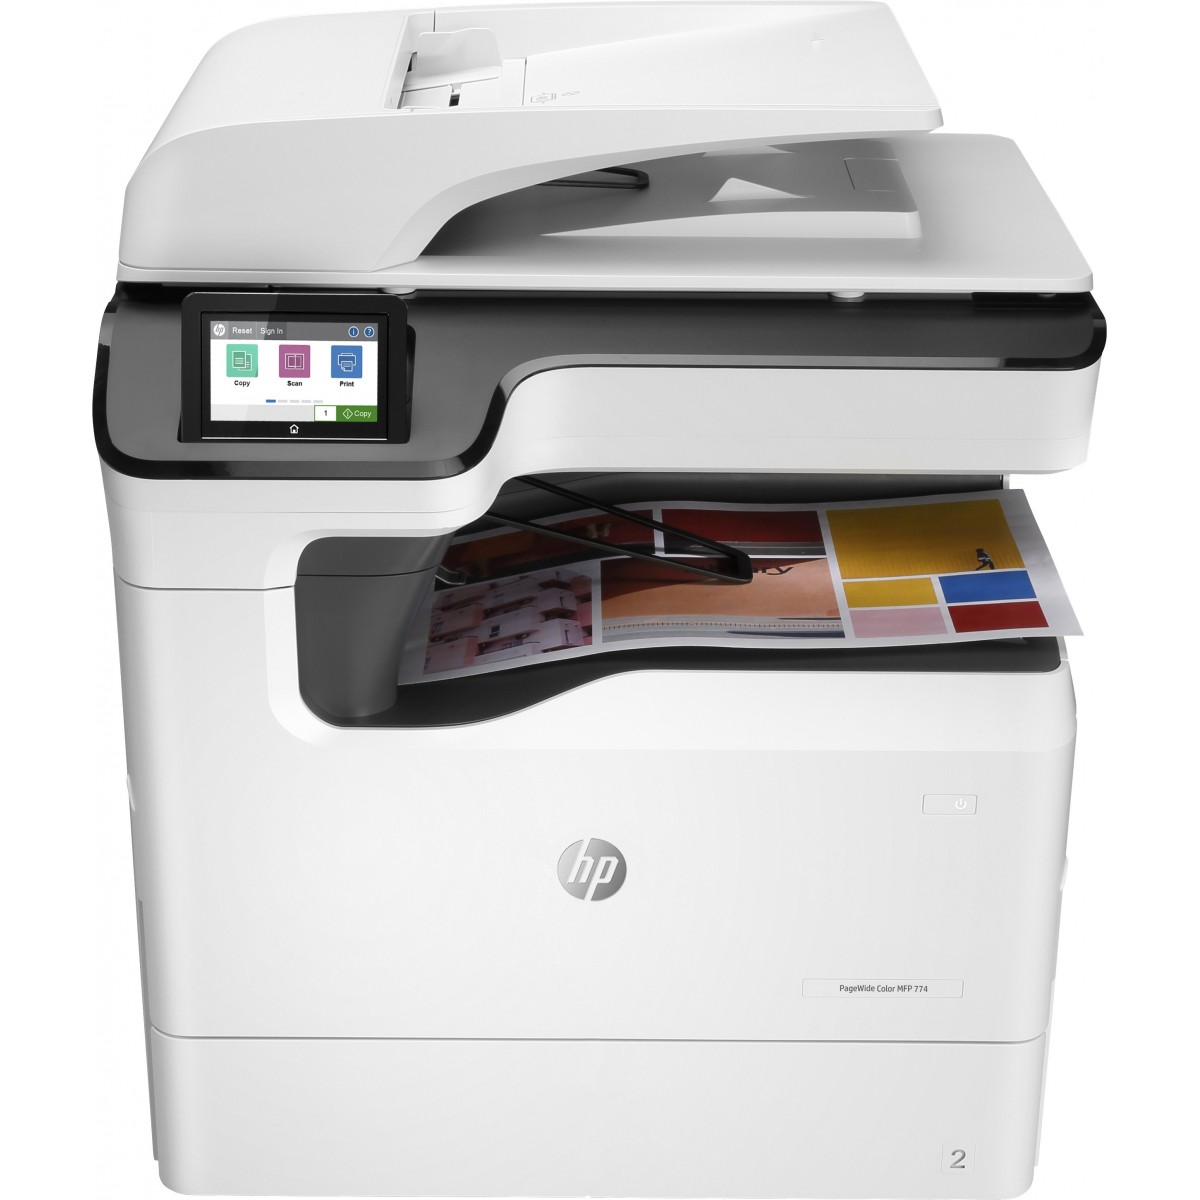 HP PageWide Color 774dn - Inkjet - Colour printing - 2400 x 1200 DPI - A3 - Direct printing - Black - White